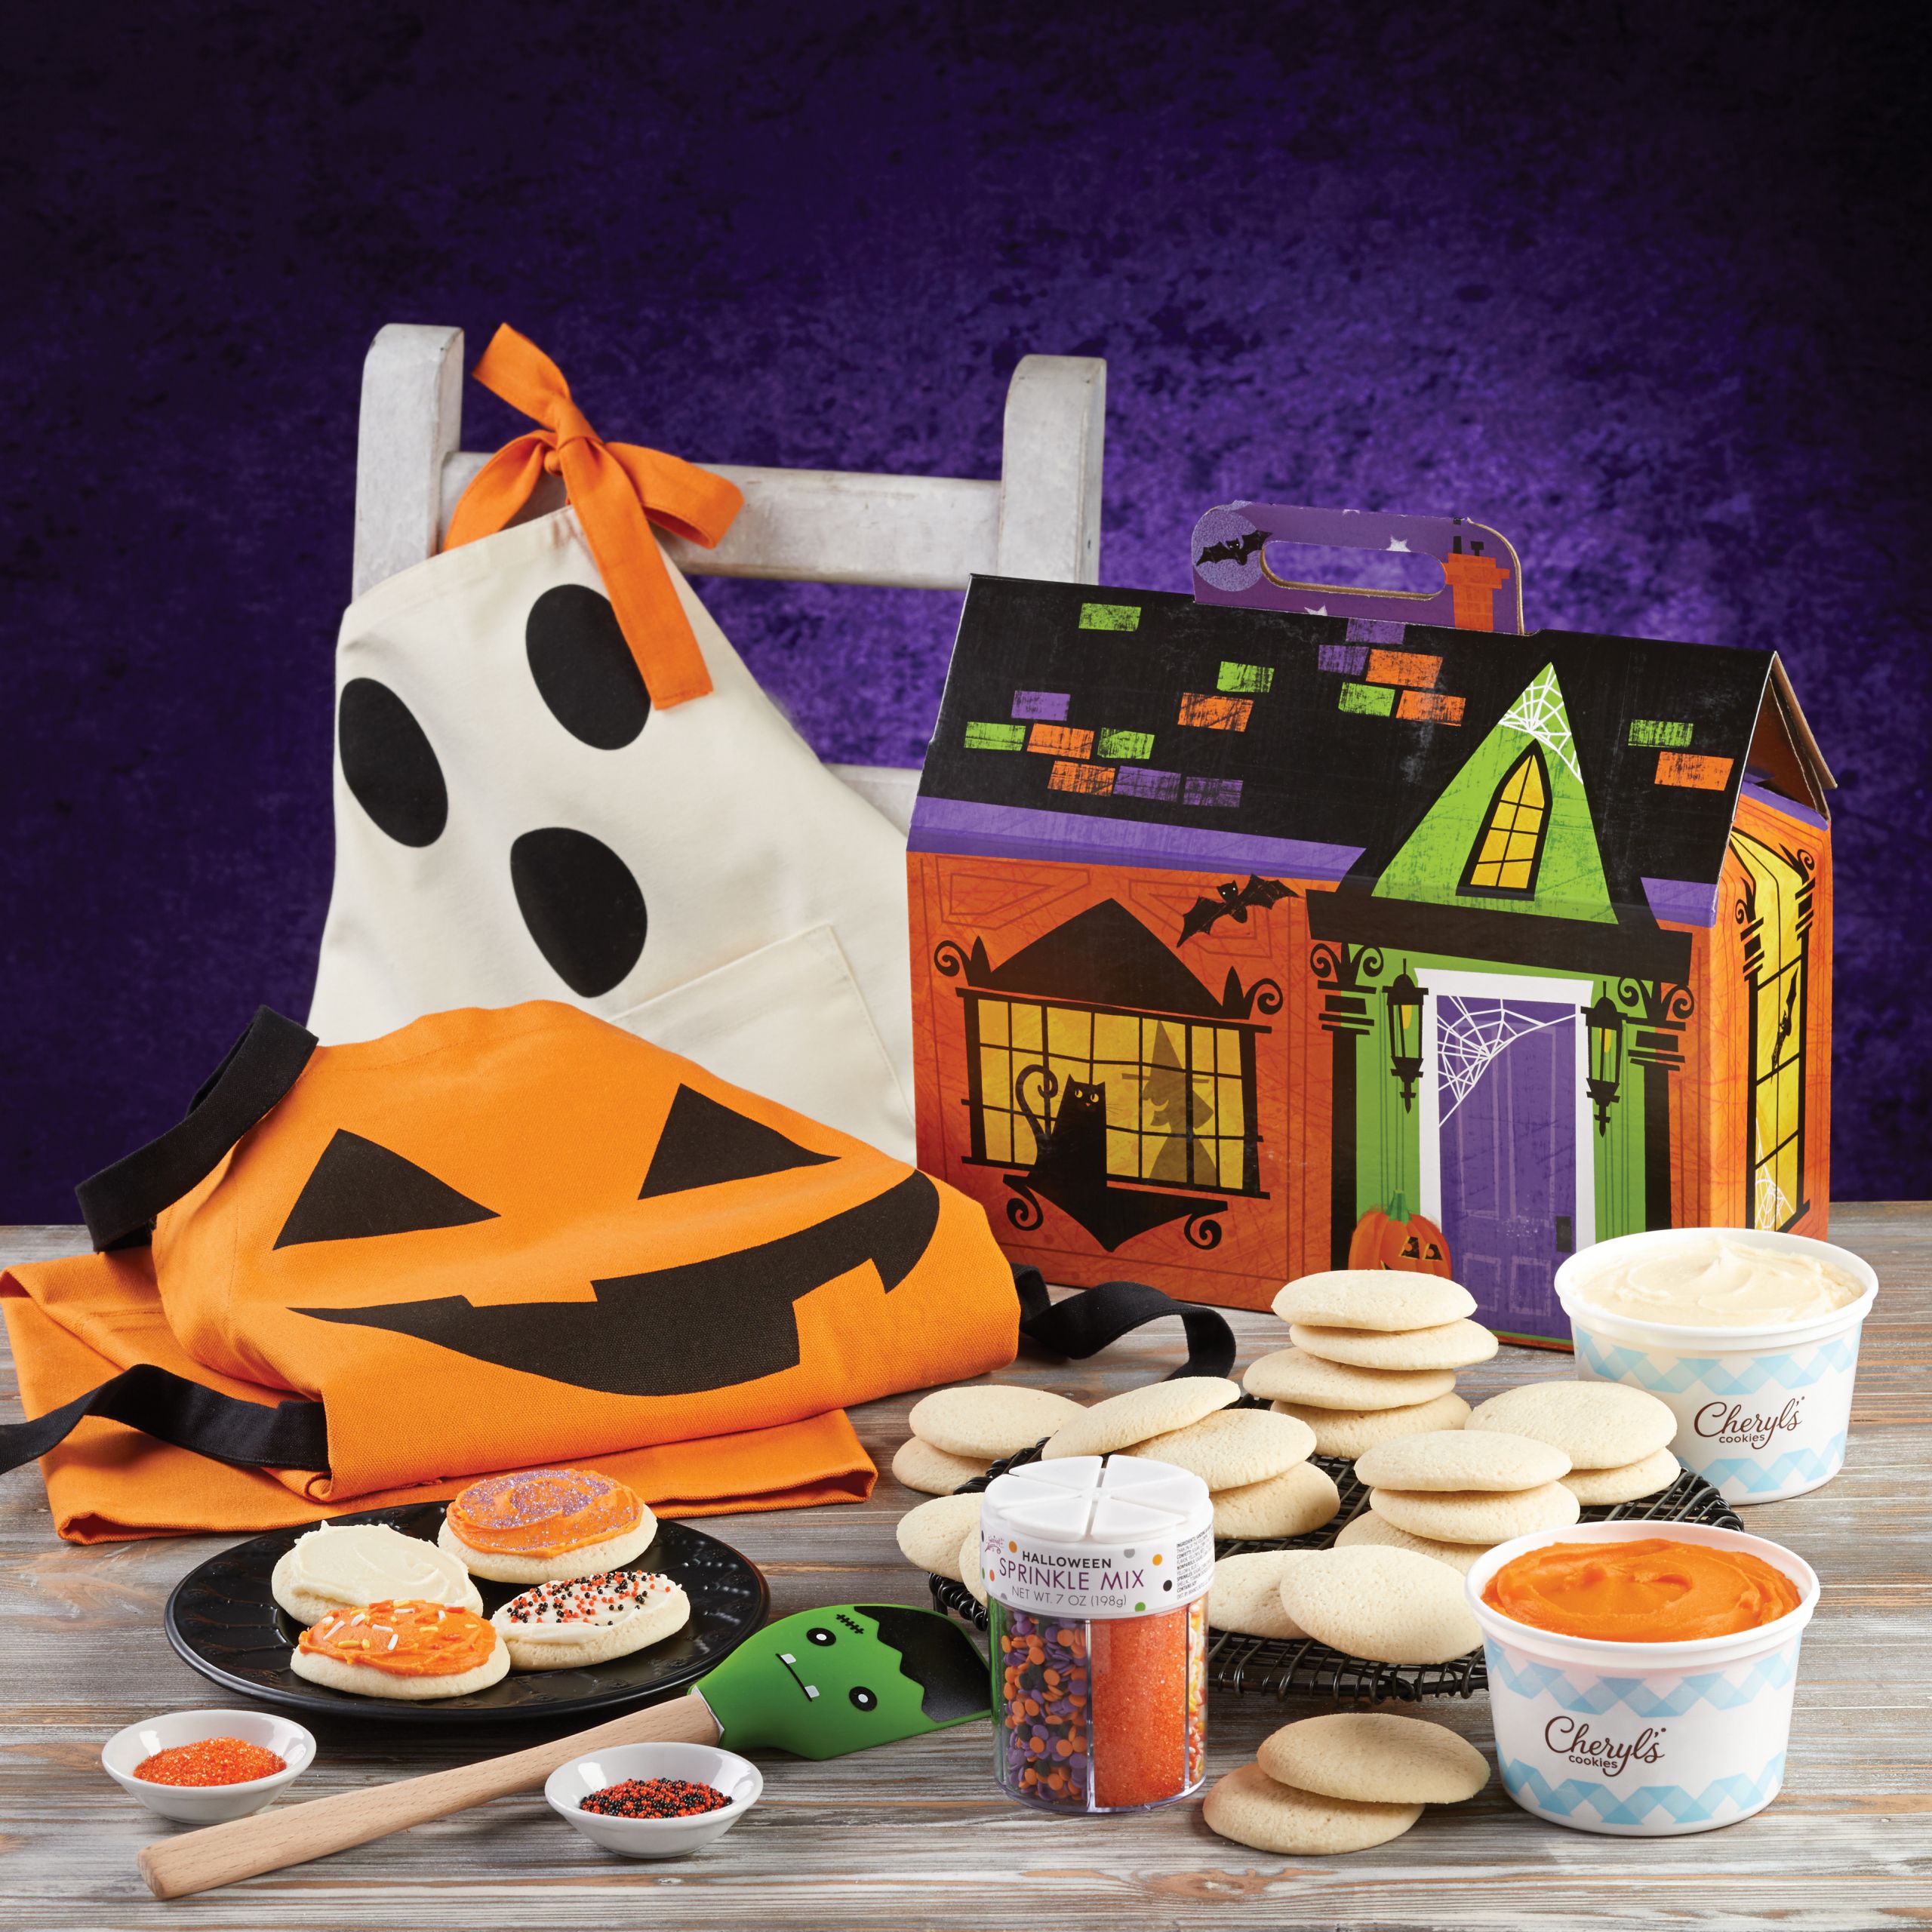 Halloween Cut Out Cookies
 Cheryl’s Cookies Halloween Cut Out Cookie Decorating Kit